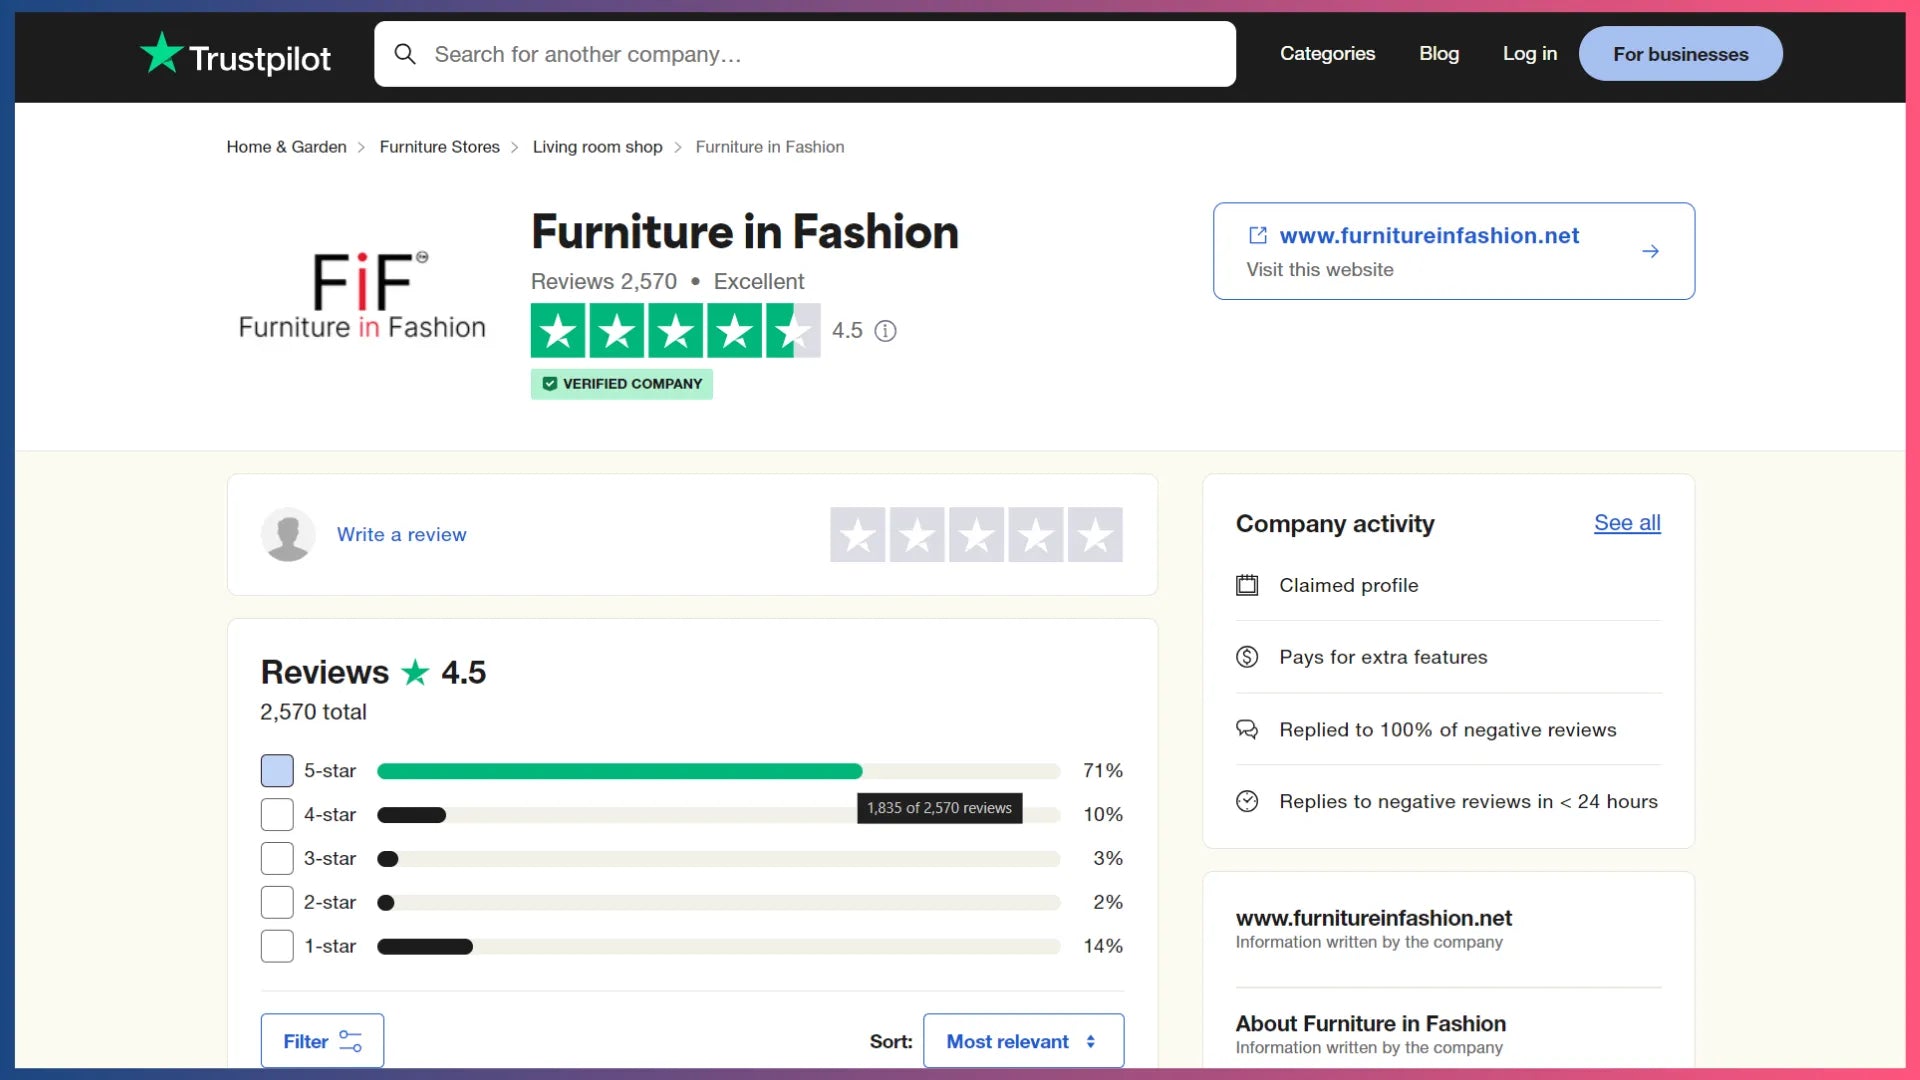 Furniture in Fashion’s rating on Trustpilot